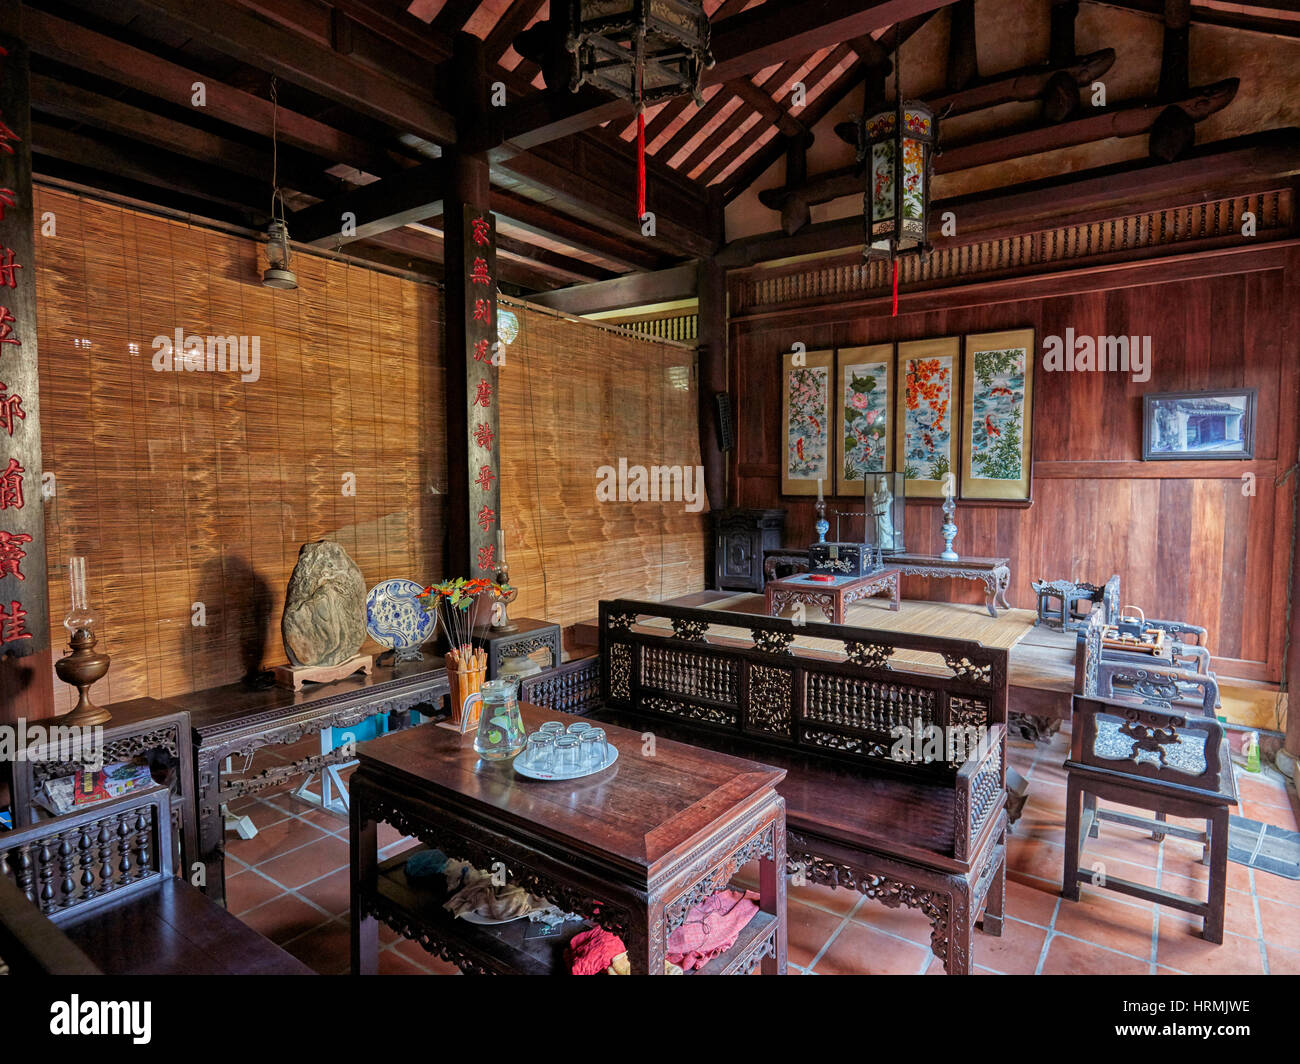 Interior of the Old House of Duc An. Hoi An Ancient Town, Quang Nam Province, Vietnam. Stock Photo